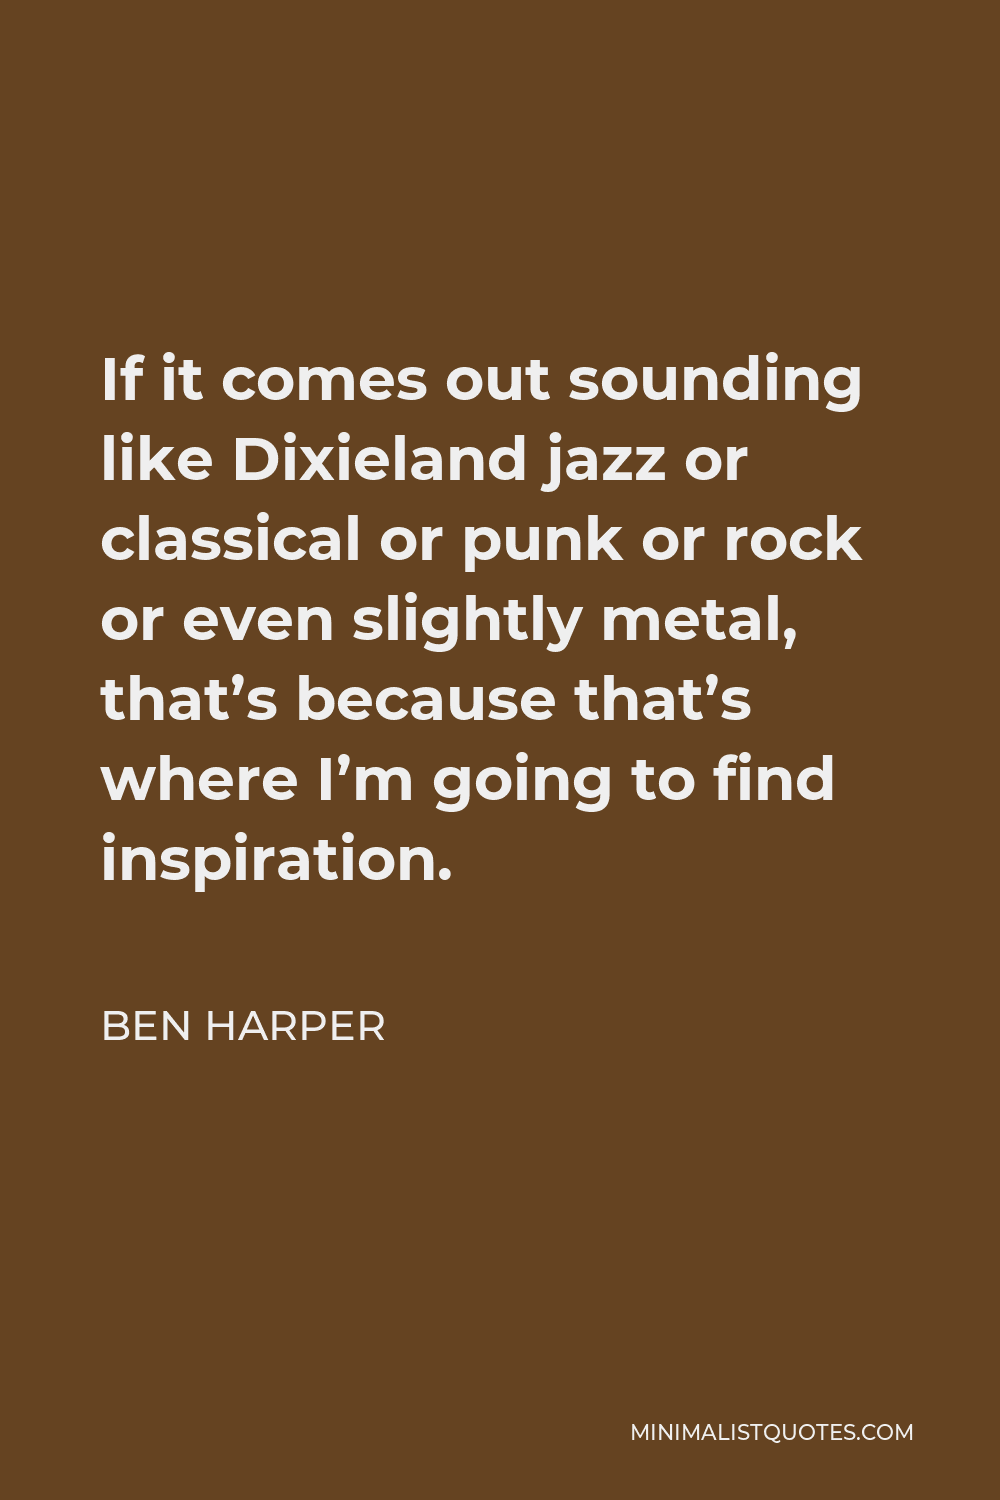 Ben Harper Quote - If it comes out sounding like Dixieland jazz or classical or punk or rock or even slightly metal, that’s because that’s where I’m going to find inspiration.